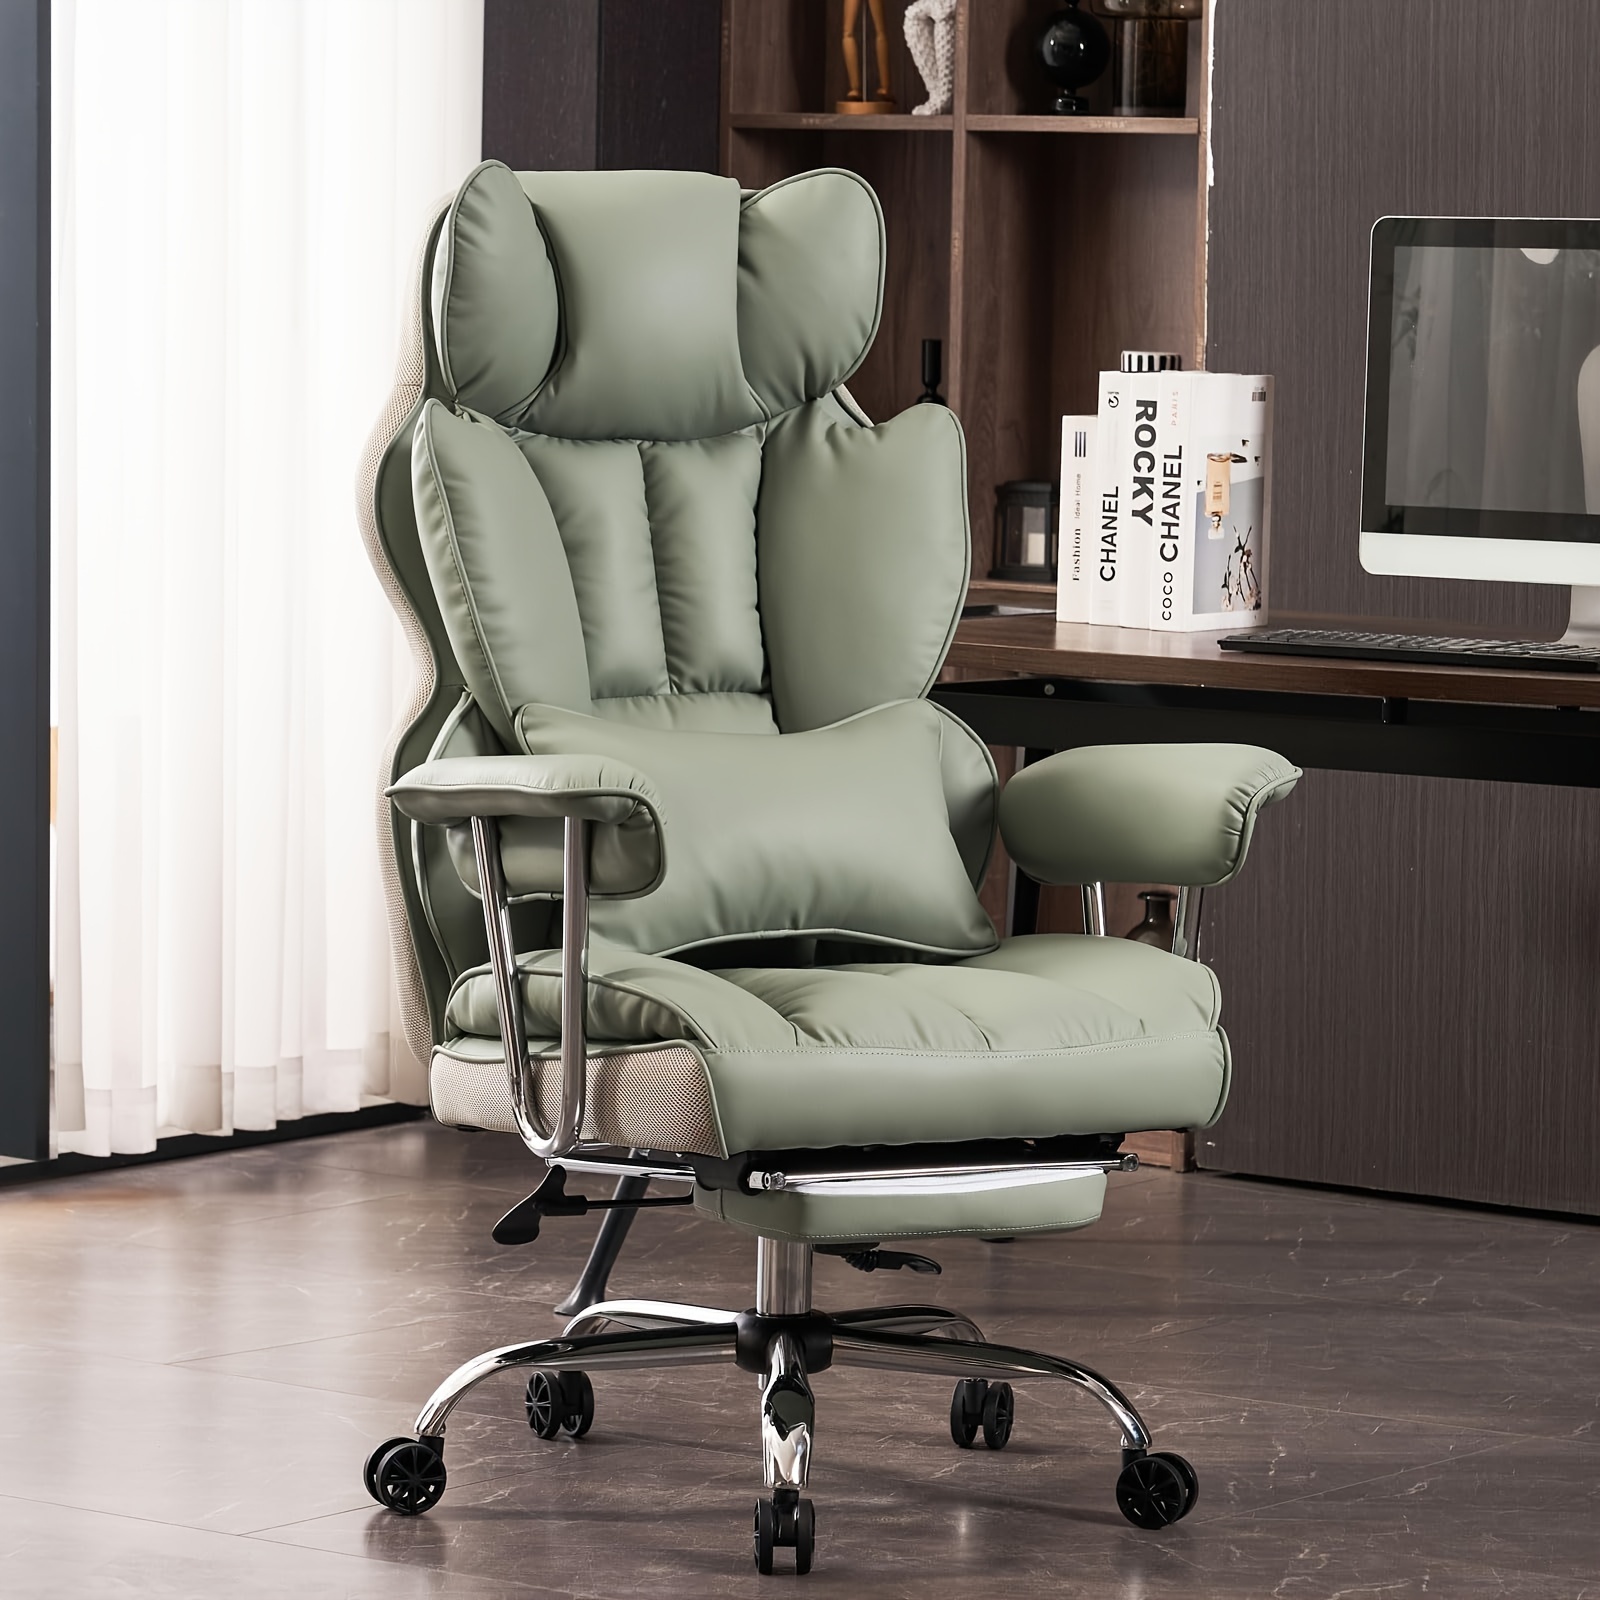 

Desk Office Chair 400lbs, Big And Tall Office Chair, Pu Leather Computer Chair, Executive Office Chair With Leg Rest And Lumbar Support